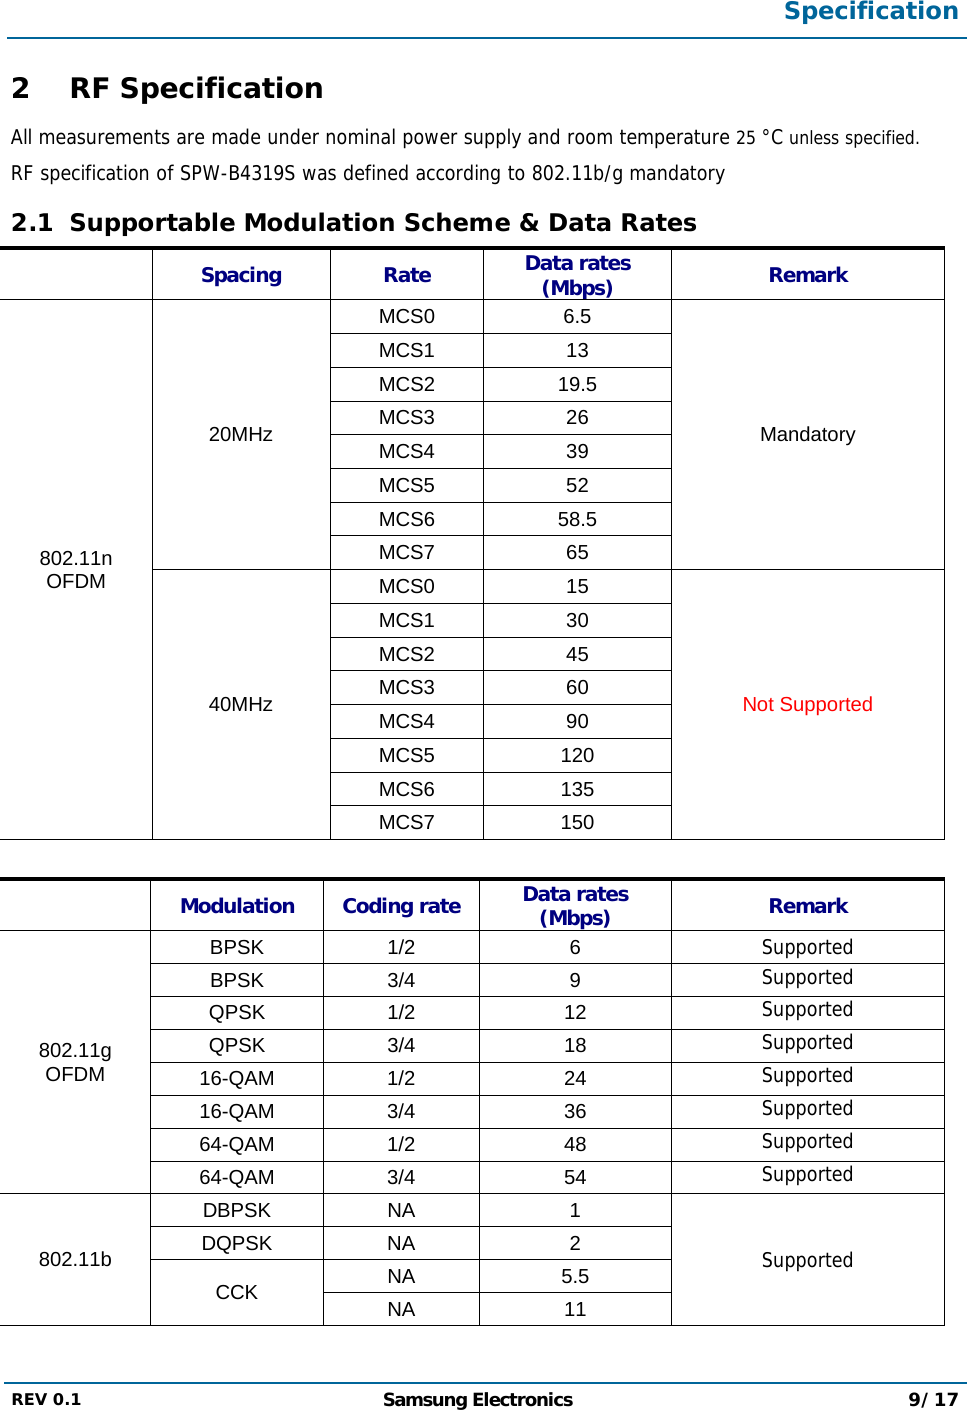  Specification  REV 0.1  Samsung Electronics 9/17  2 RF Specification All measurements are made under nominal power supply and room temperature 25 °C unless specified. RF specification of SPW-B4319S was defined according to 802.11b/g mandatory  2.1 Supportable Modulation Scheme &amp; Data Rates  Spacing Rate Data rates (Mbps)  Remark 802.11n OFDM 20MHz MCS0 6.5 Mandatory MCS1 13 MCS2 19.5 MCS3 26 MCS4 39 MCS5 52 MCS6 58.5 MCS7 65 40MHz MCS0 15 Not Supported MCS1 30 MCS2 45 MCS3 60 MCS4 90 MCS5 120 MCS6 135 MCS7 150   Modulation Coding rate Data rates (Mbps)  Remark 802.11g OFDM BPSK 1/2  6  Supported BPSK 3/4  9  Supported QPSK 1/2  12  Supported QPSK 3/4  18  Supported 16-QAM 1/2  24  Supported 16-QAM 3/4  36  Supported 64-QAM 1/2  48  Supported 64-QAM 3/4  54  Supported 802.11b DBPSK NA  1 Supported DQPSK NA  2 CCK  NA 5.5 NA 11 